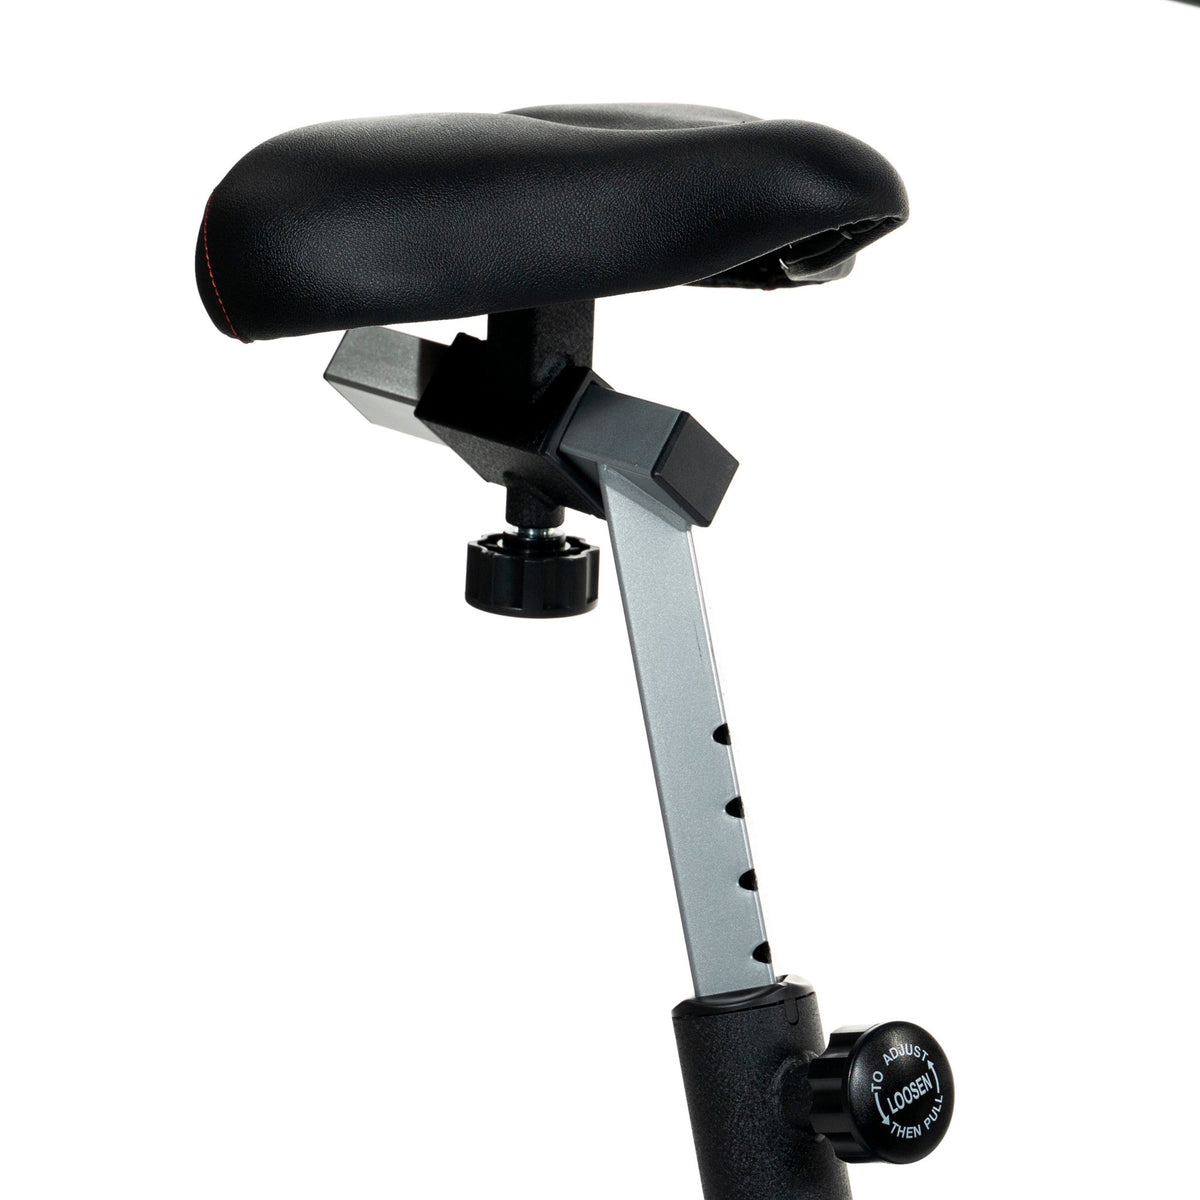 FitWay Equip. 1000UC Upright Cycle - Fitness Experience